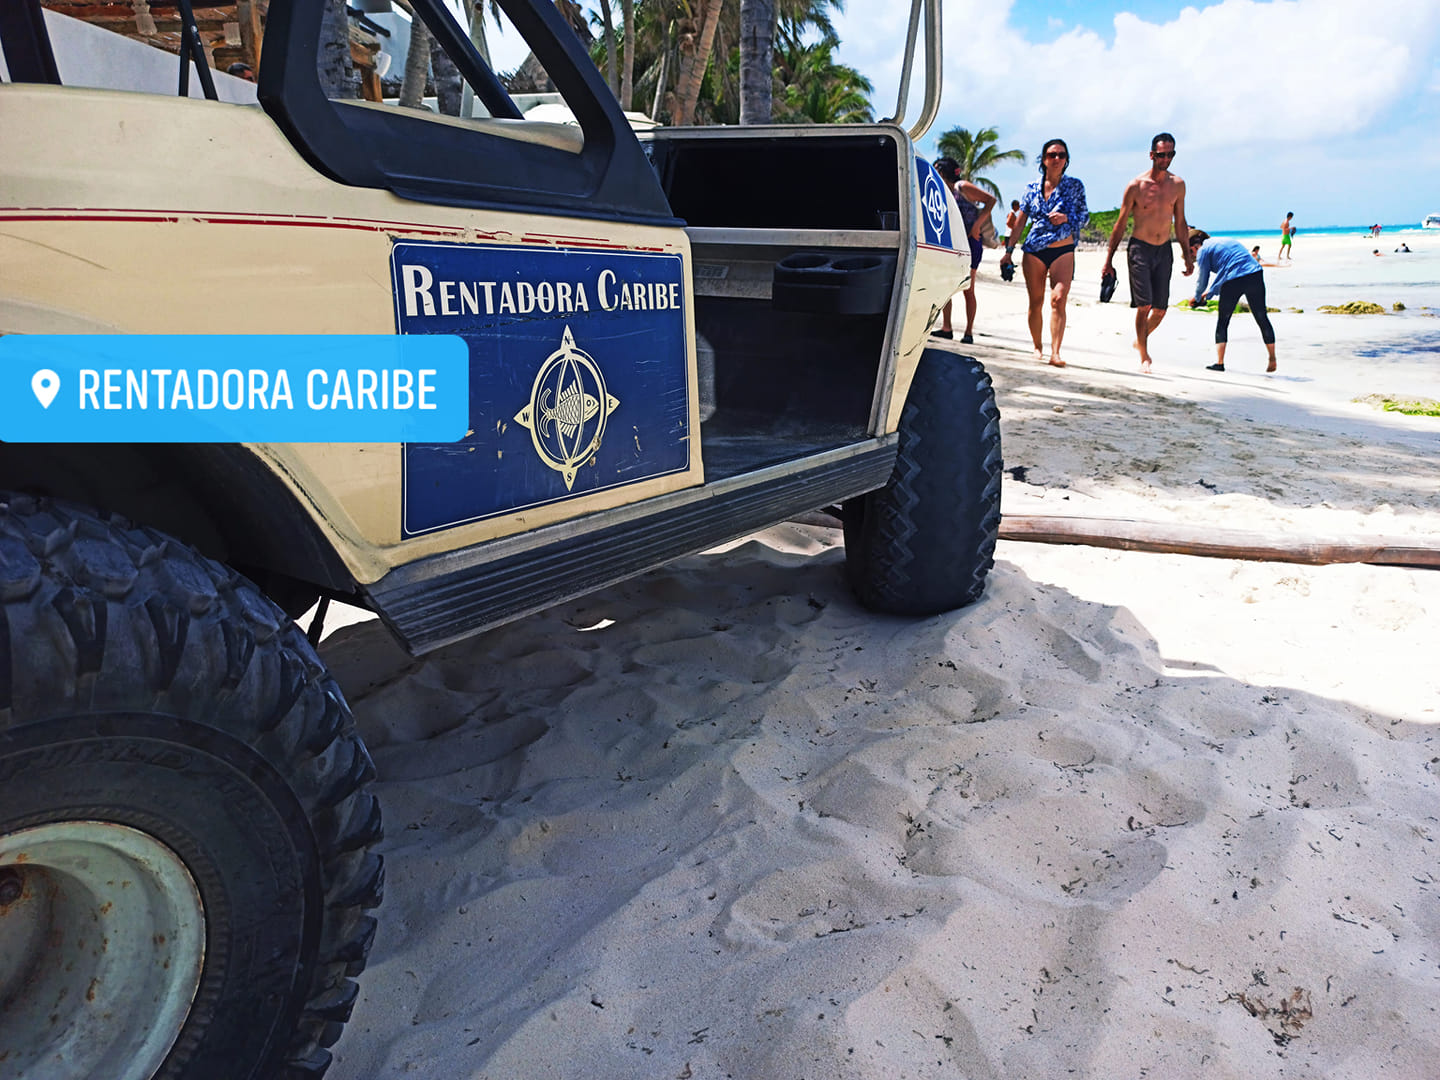 Important considerations for renting a golf cart on Isla Mujeres